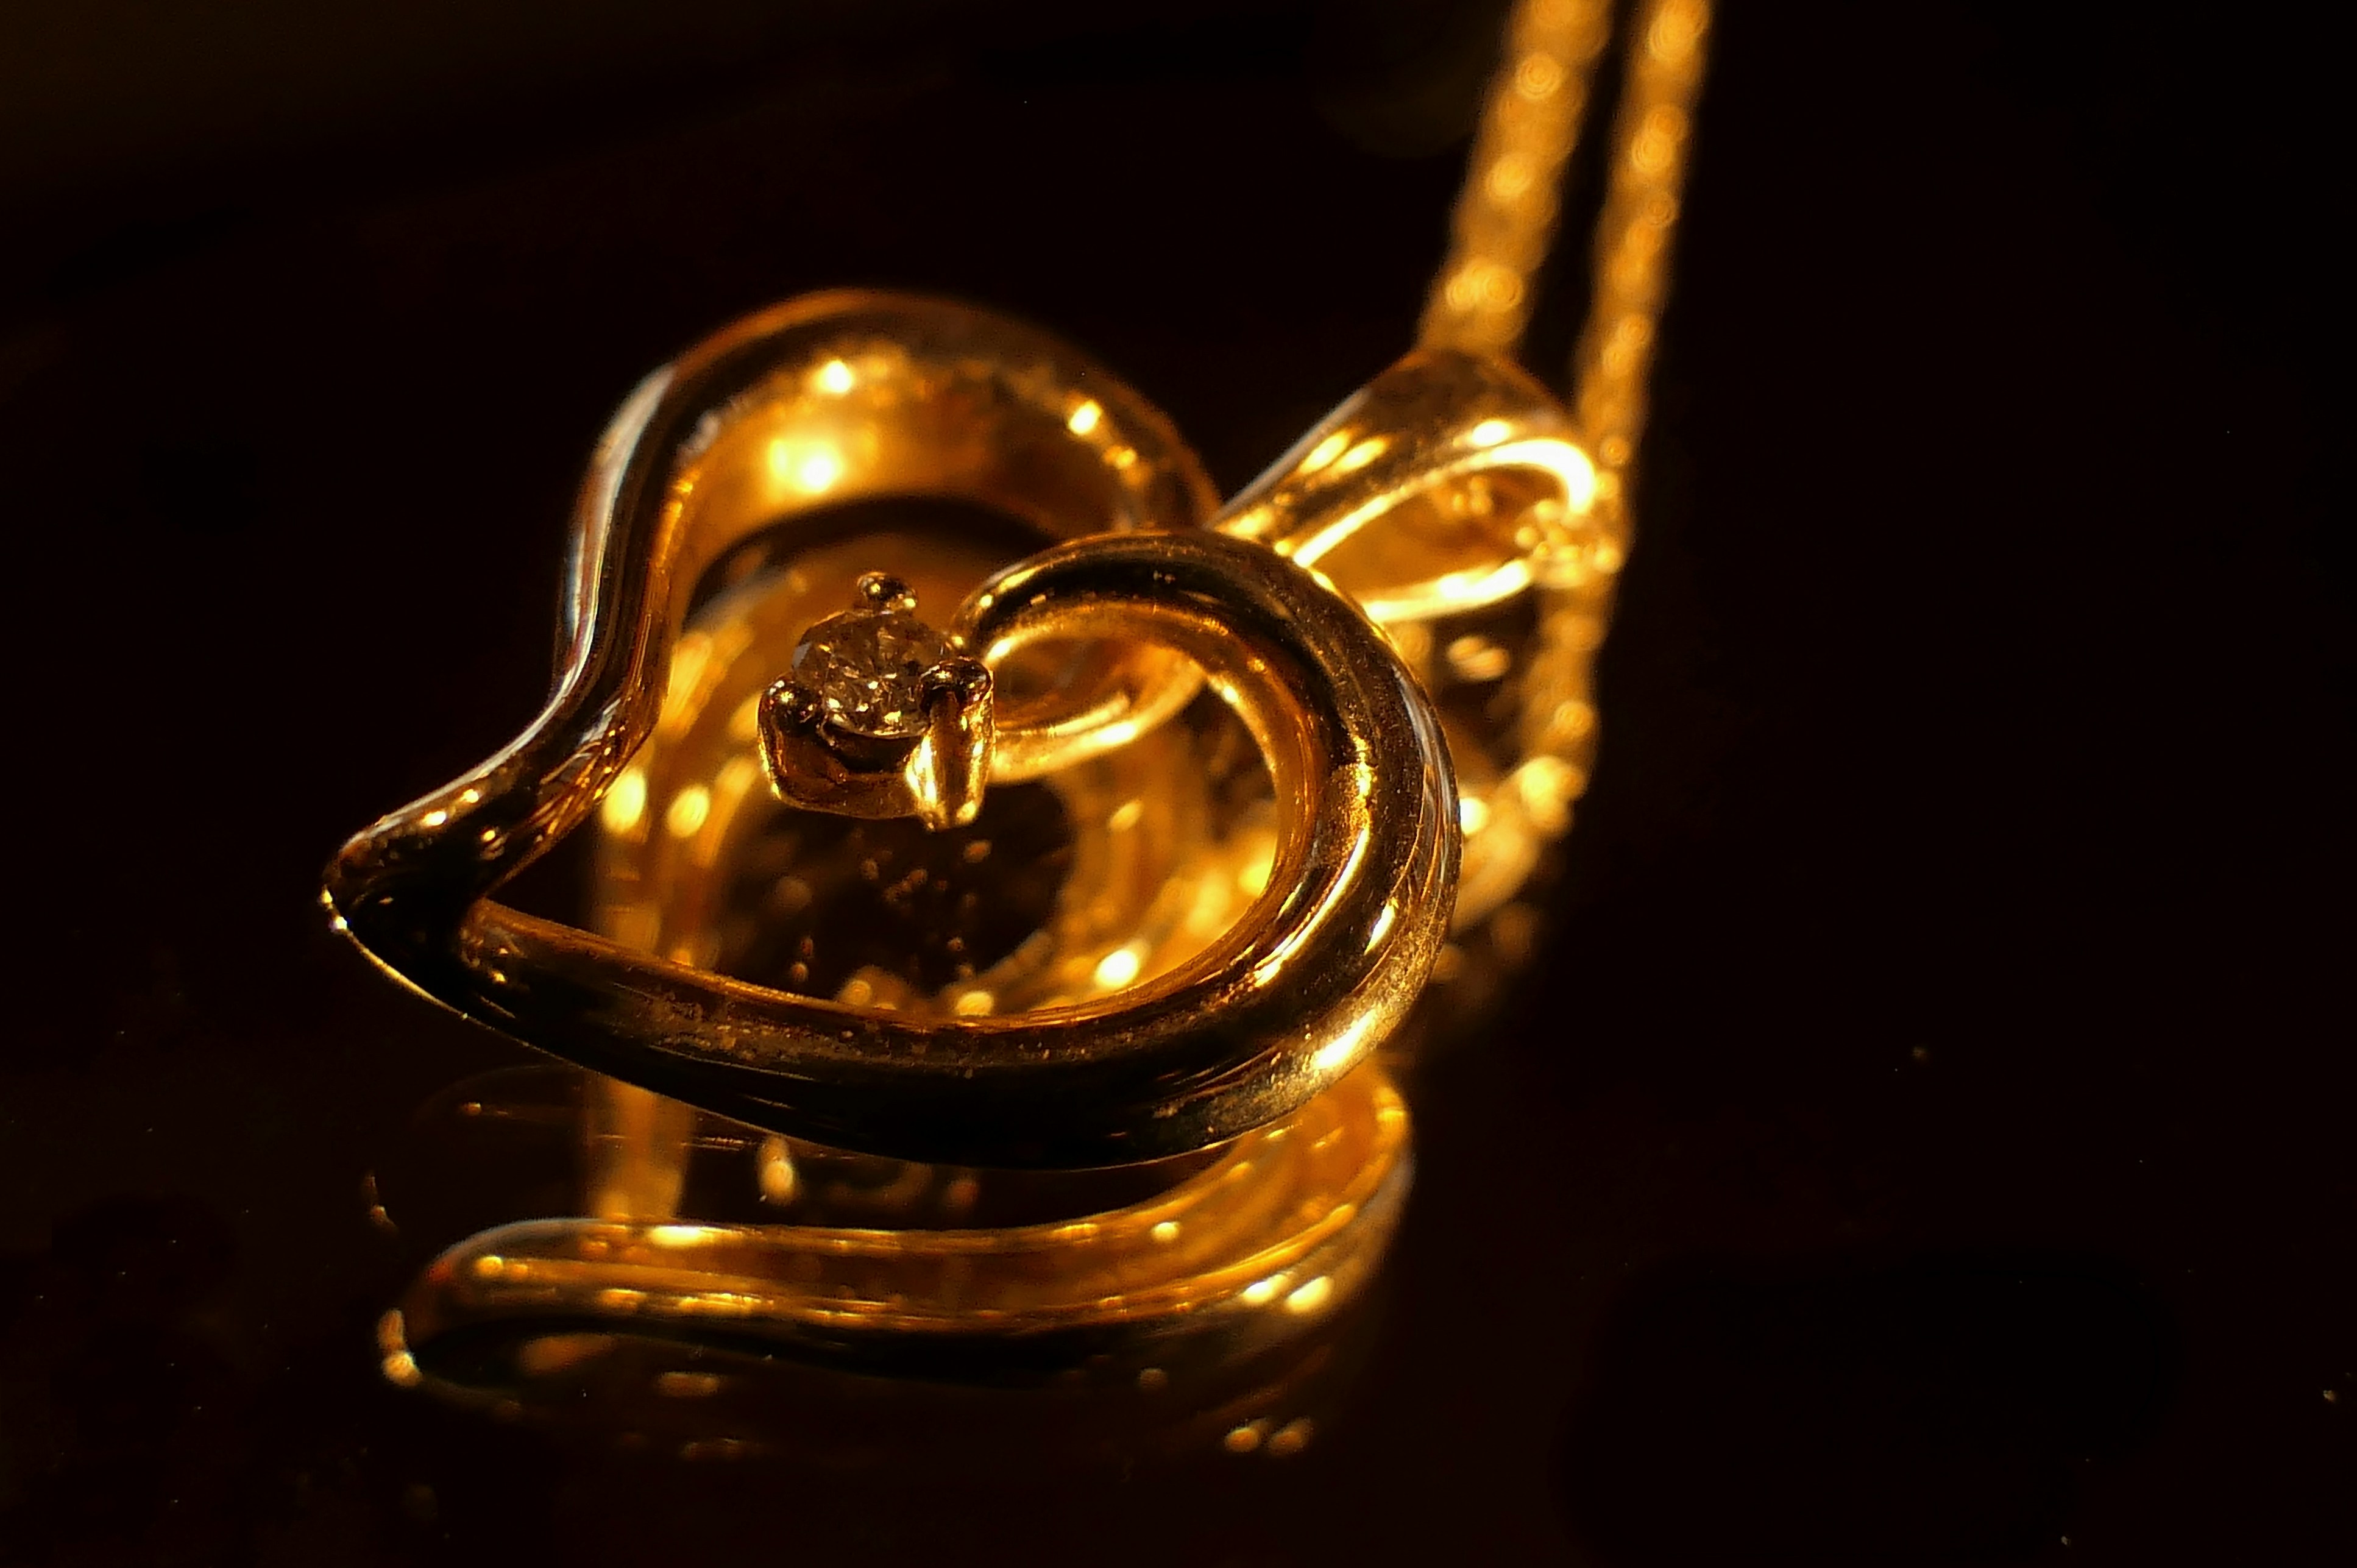 gold heart pendant and chain reflecting on mirror